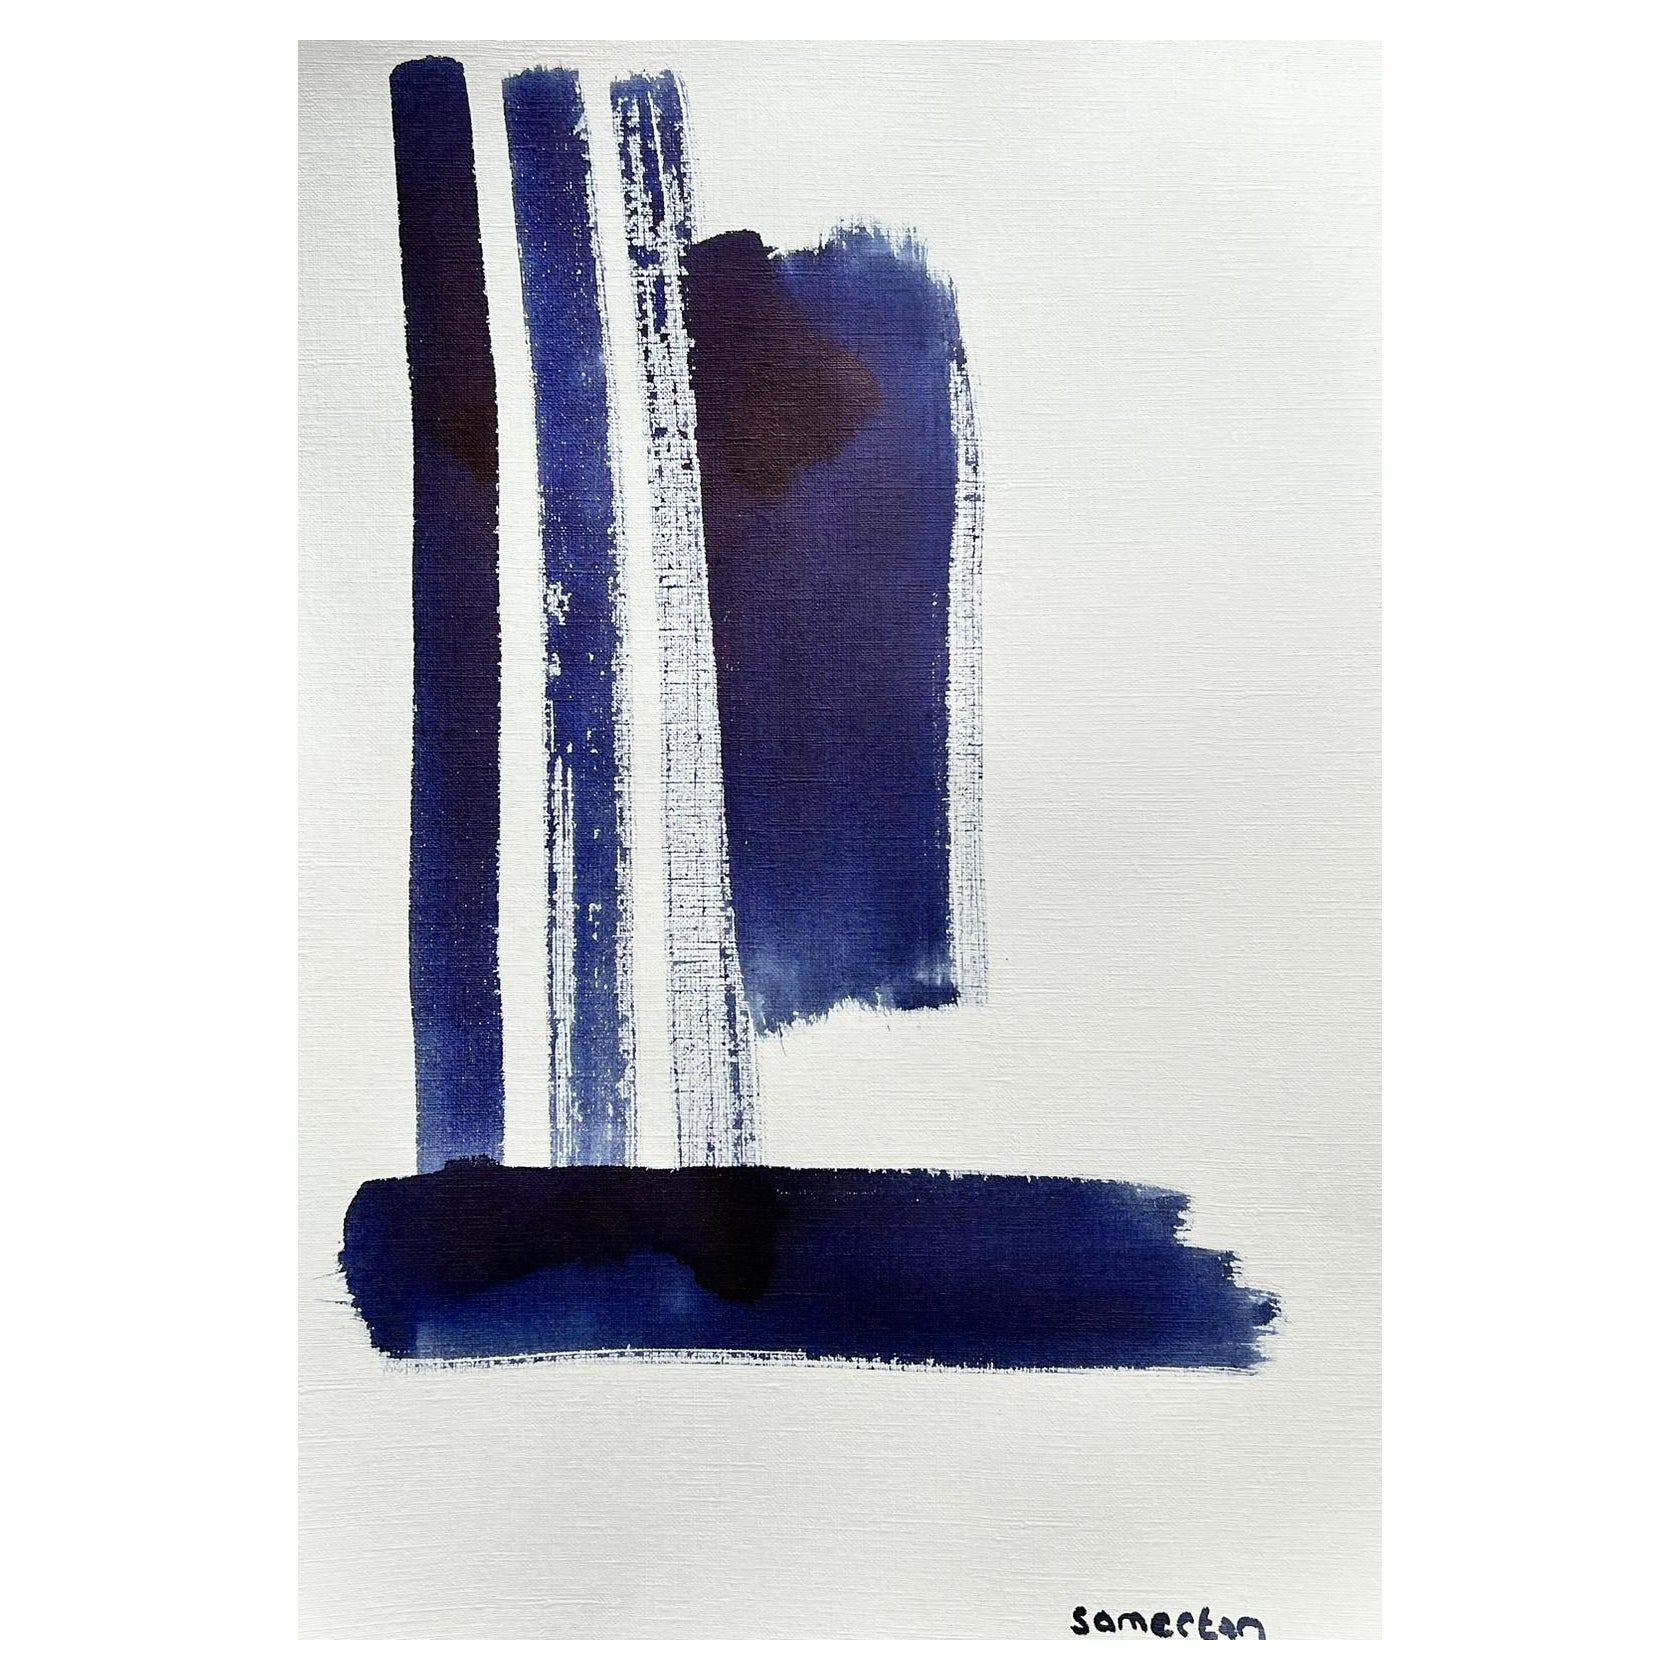 Robert Somerton Abstract Painting - Abstract Expressionist British Original Painting Shapes Patterns Blue & White